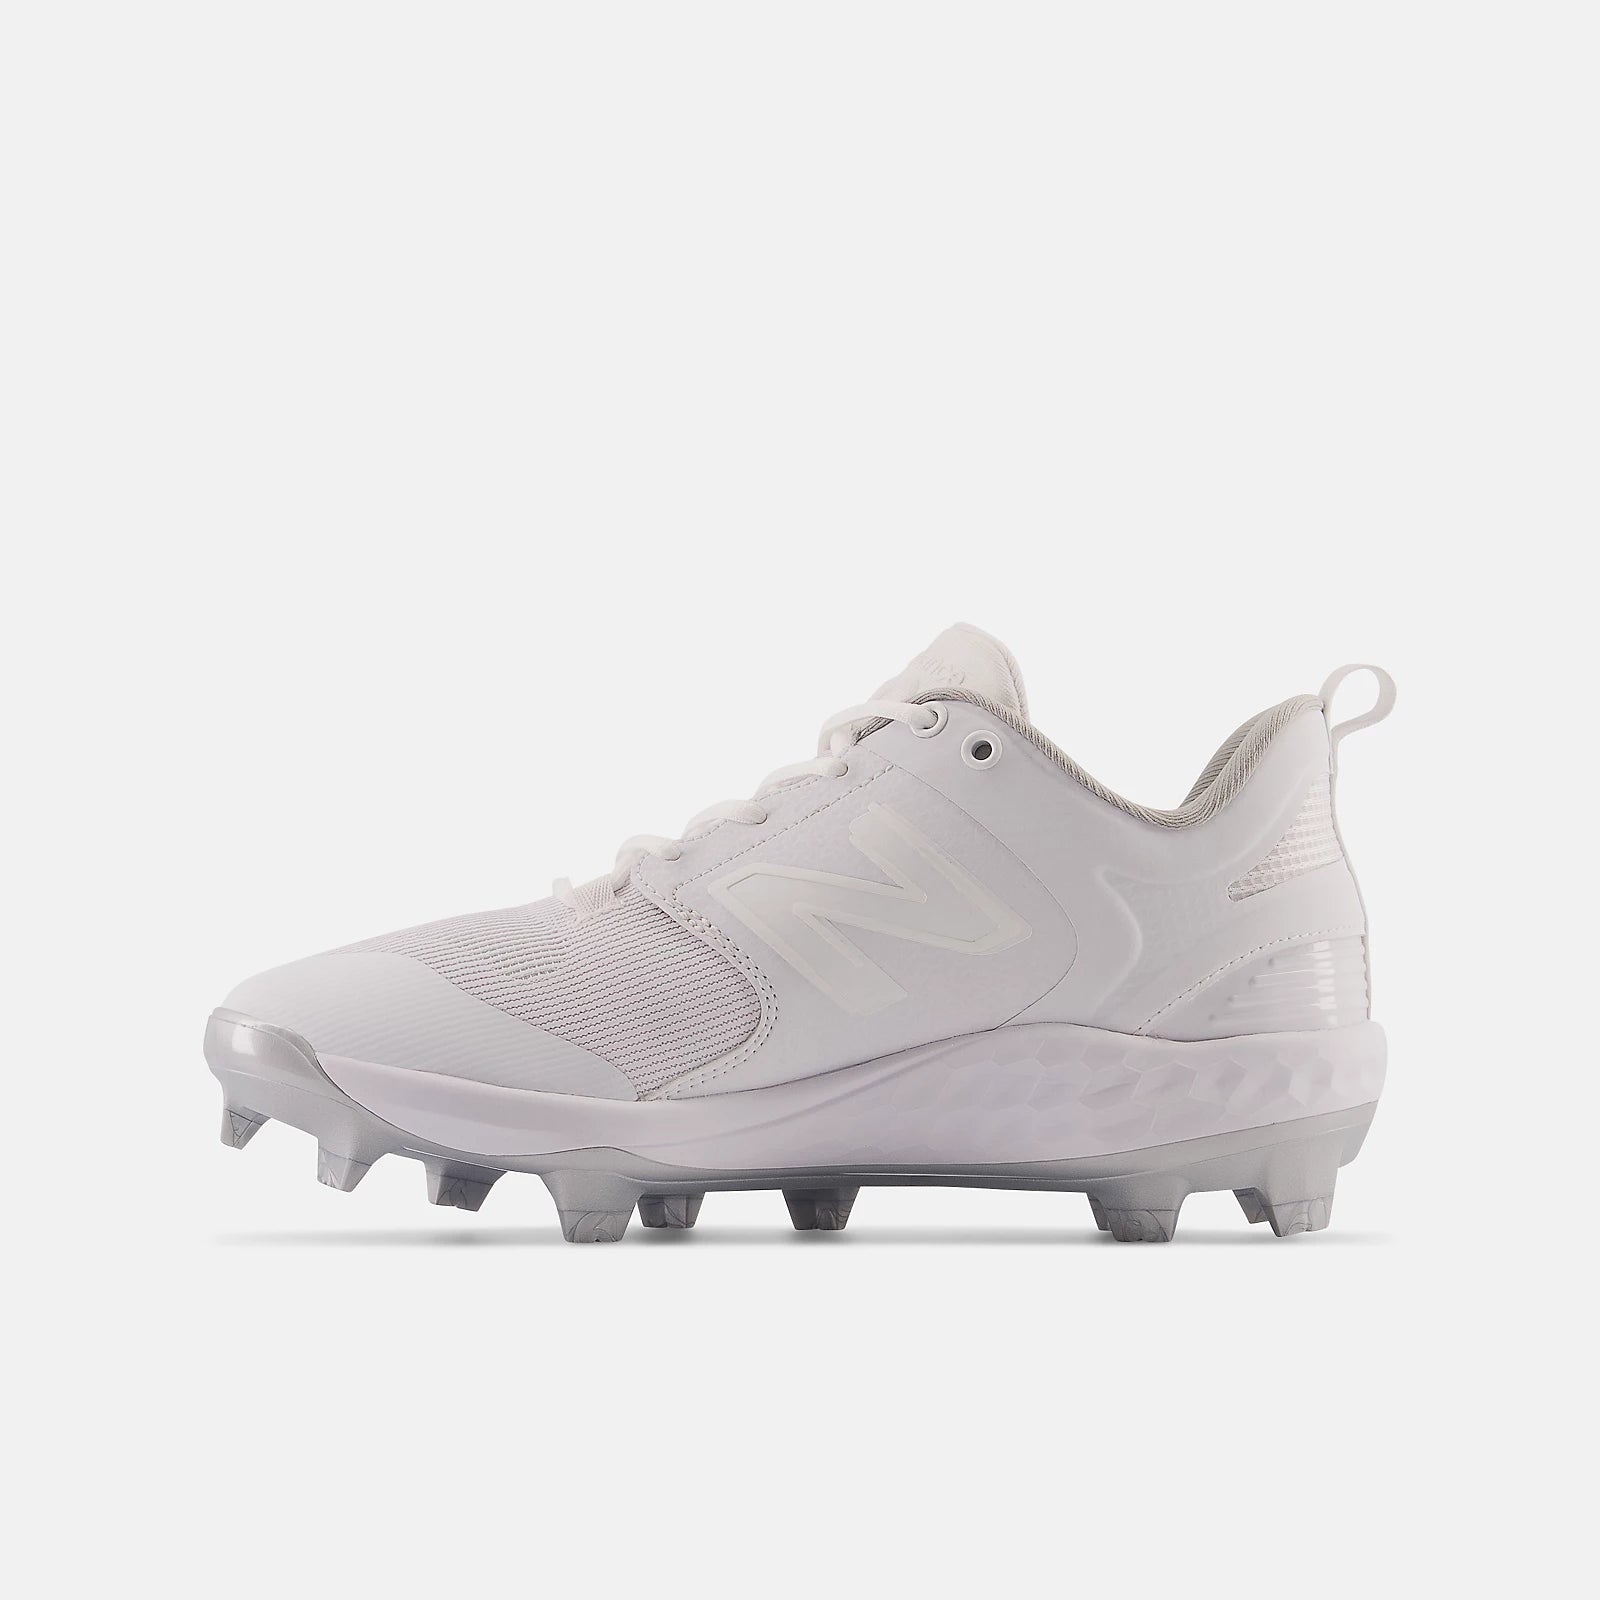 New Balance Pearls PL3000v6 Molded Cleats